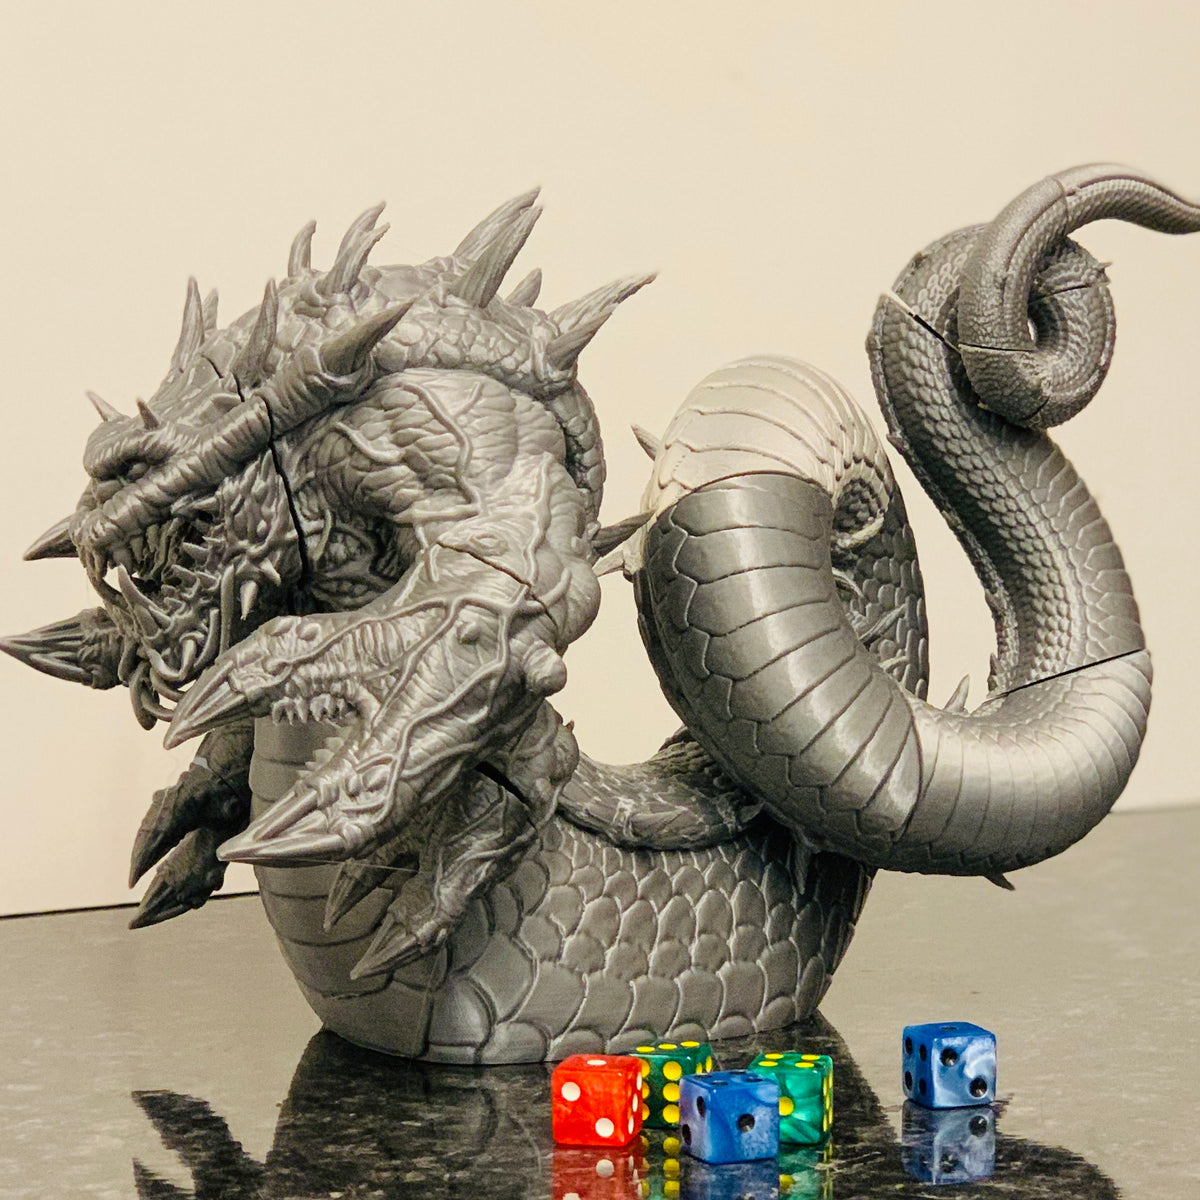 ASTRAL TERROR - EPIC Sized Model Kit | Dungeons and dragons | Cthulhu| Pathfinder | War Gaming